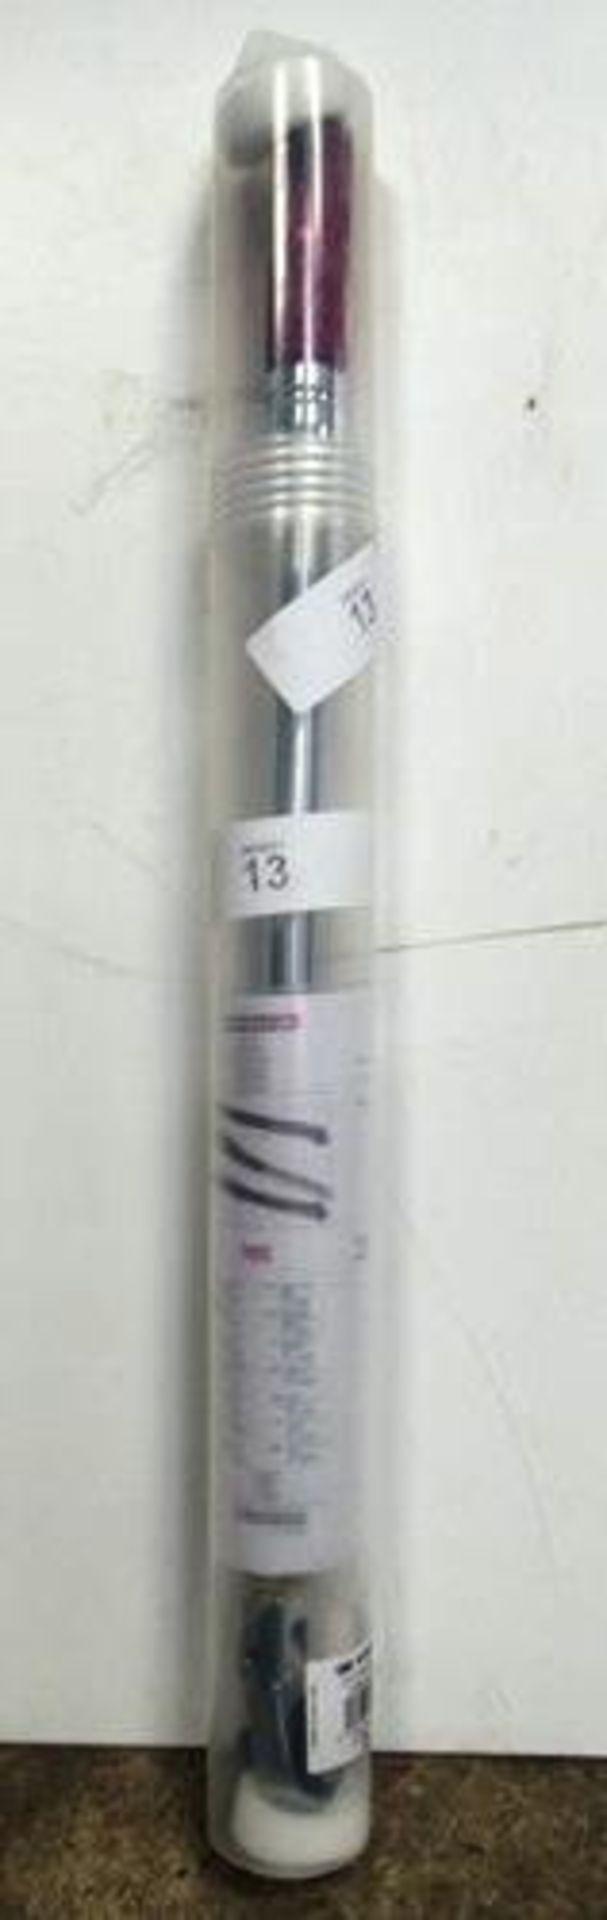 A Facom CLE Dynamometrique torque wrench, model S-306-340MF - New in box (TC3)